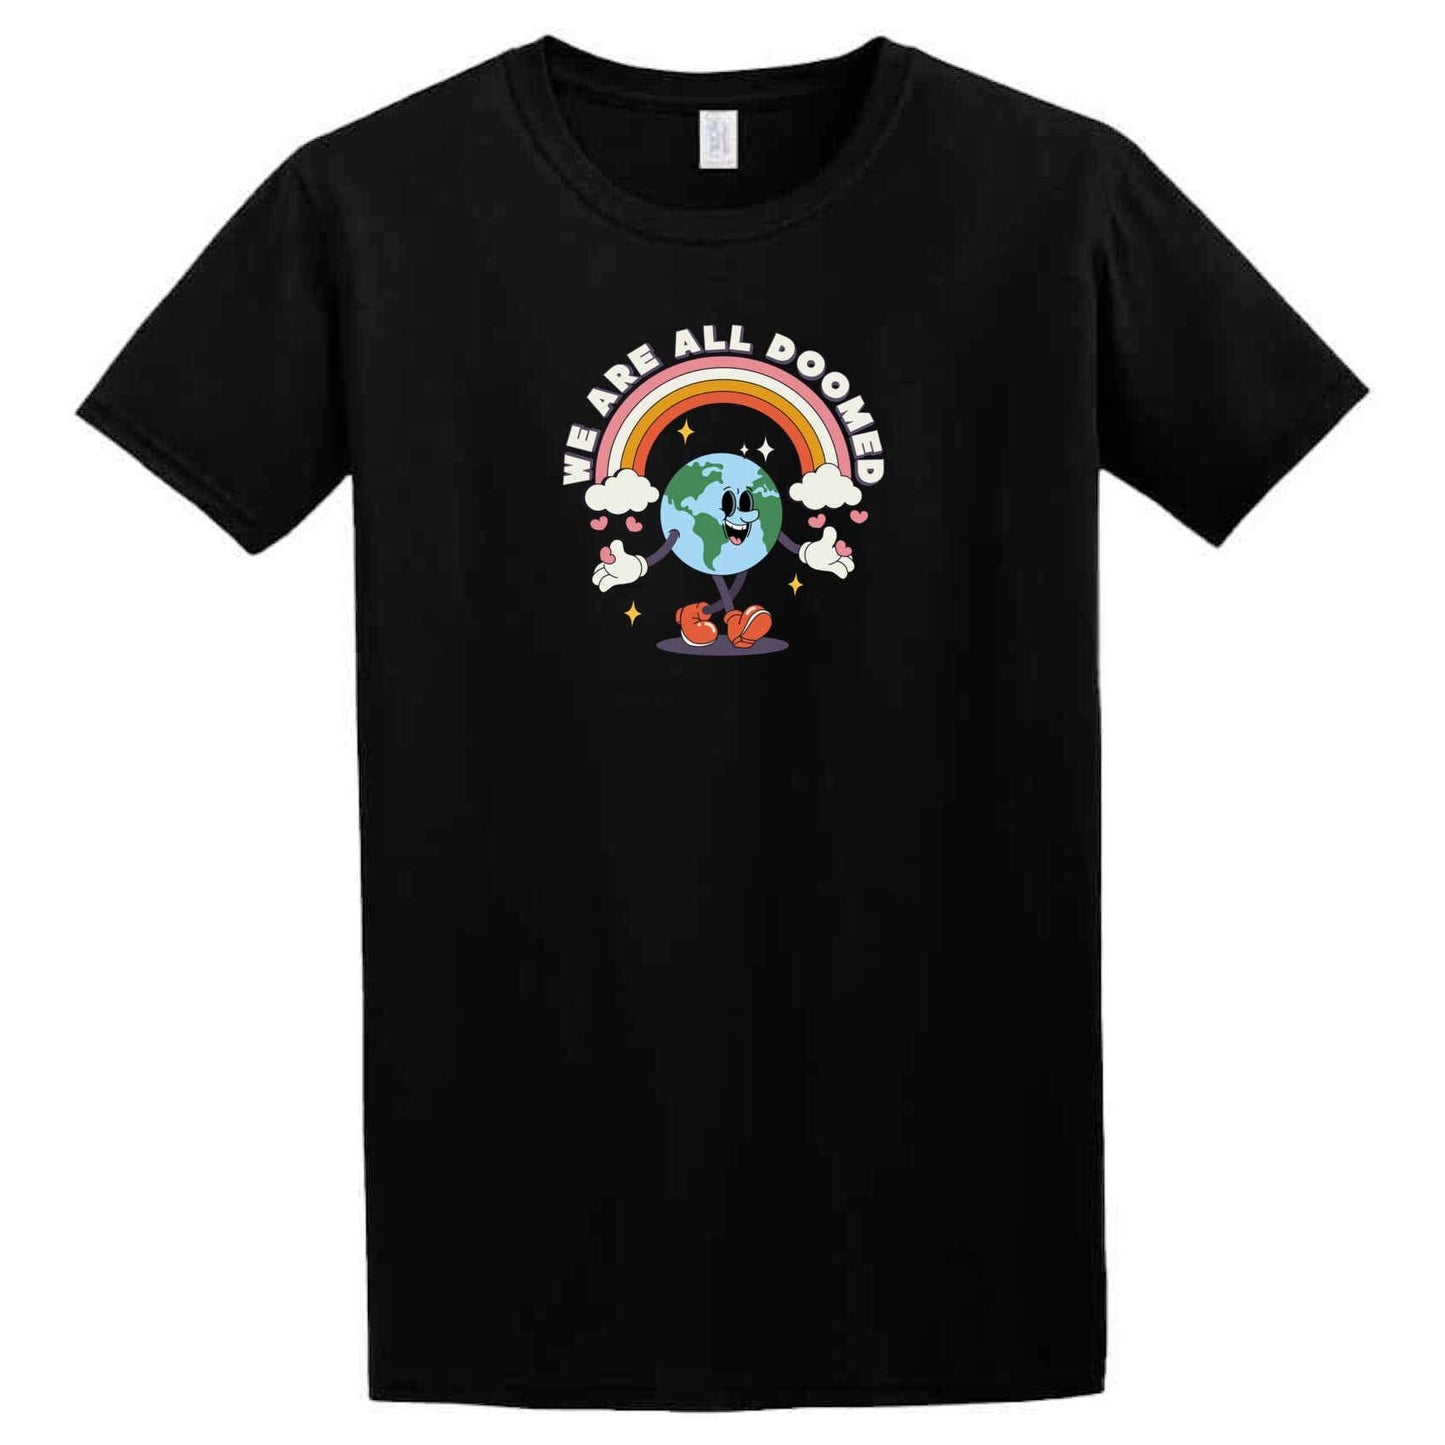 A Twisted Gifts Doomed T-Shirt with an image of an earth with a rainbow on it.